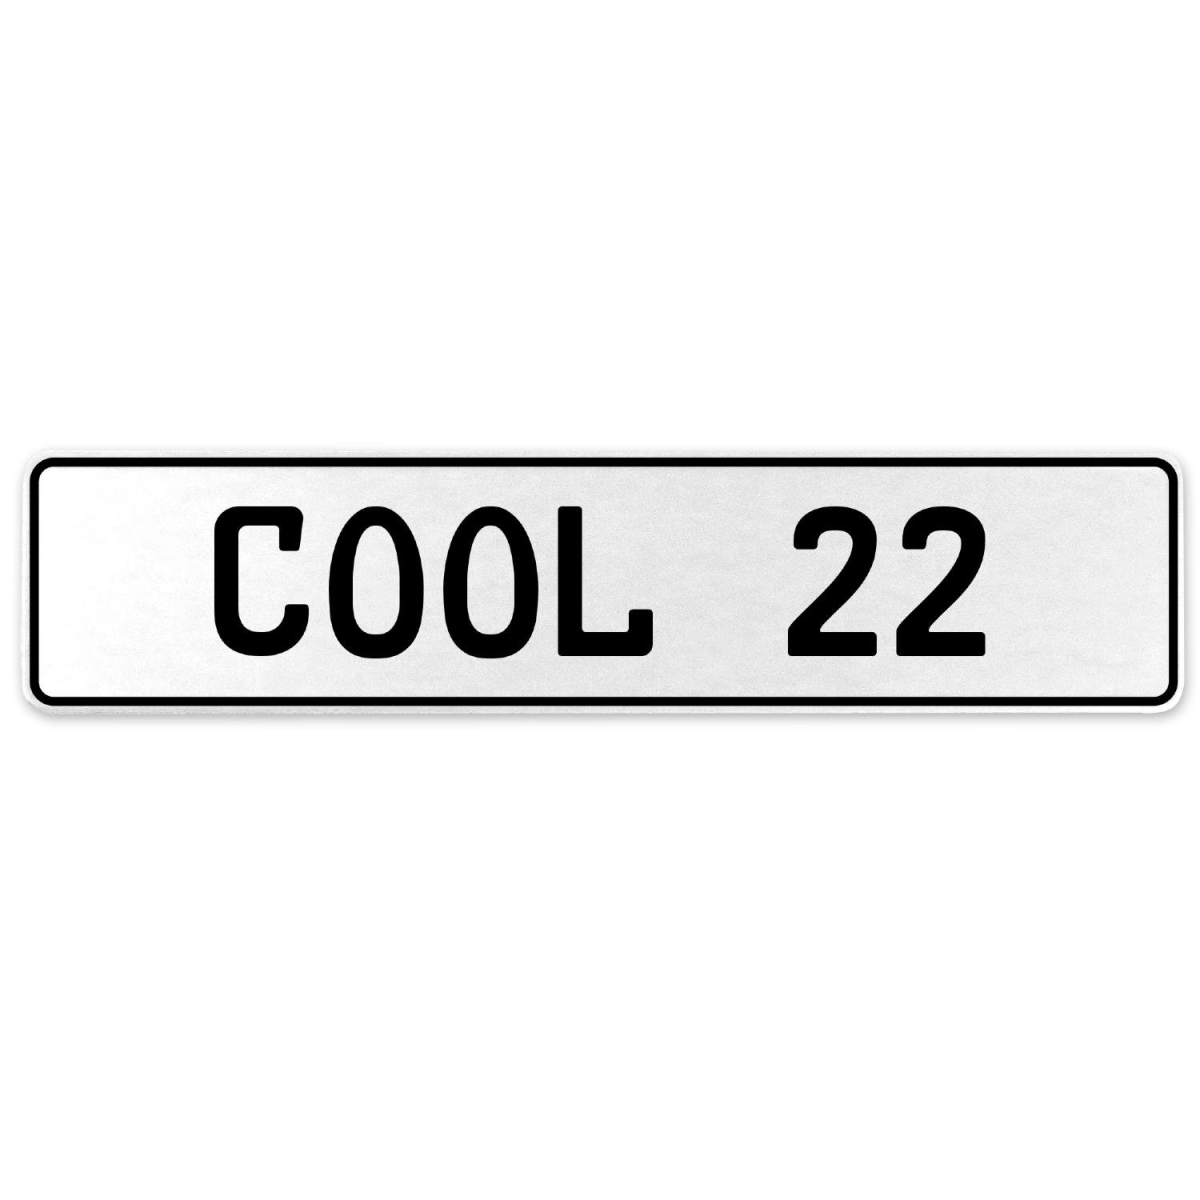 553728 Cool 22 - White Aluminum Street Sign Mancave Euro Plate Name Door Sign Wall